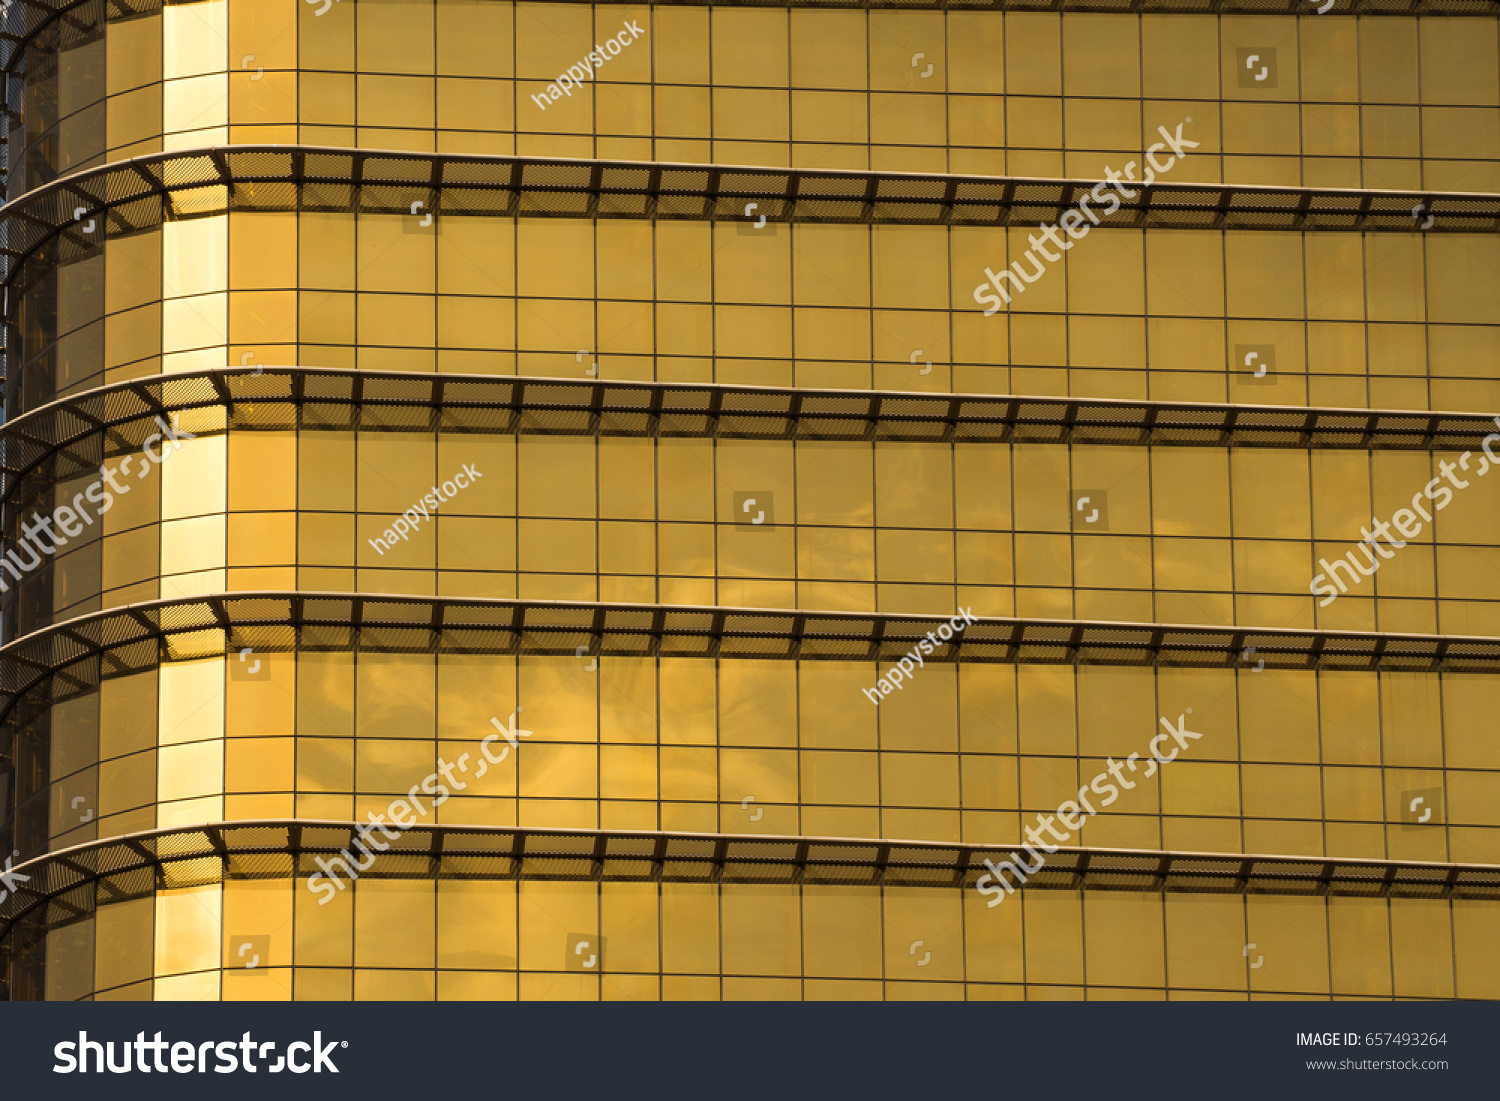 Yellow Gold Mirror Glass Building Exterior Stock Photo Edit Now 657493264